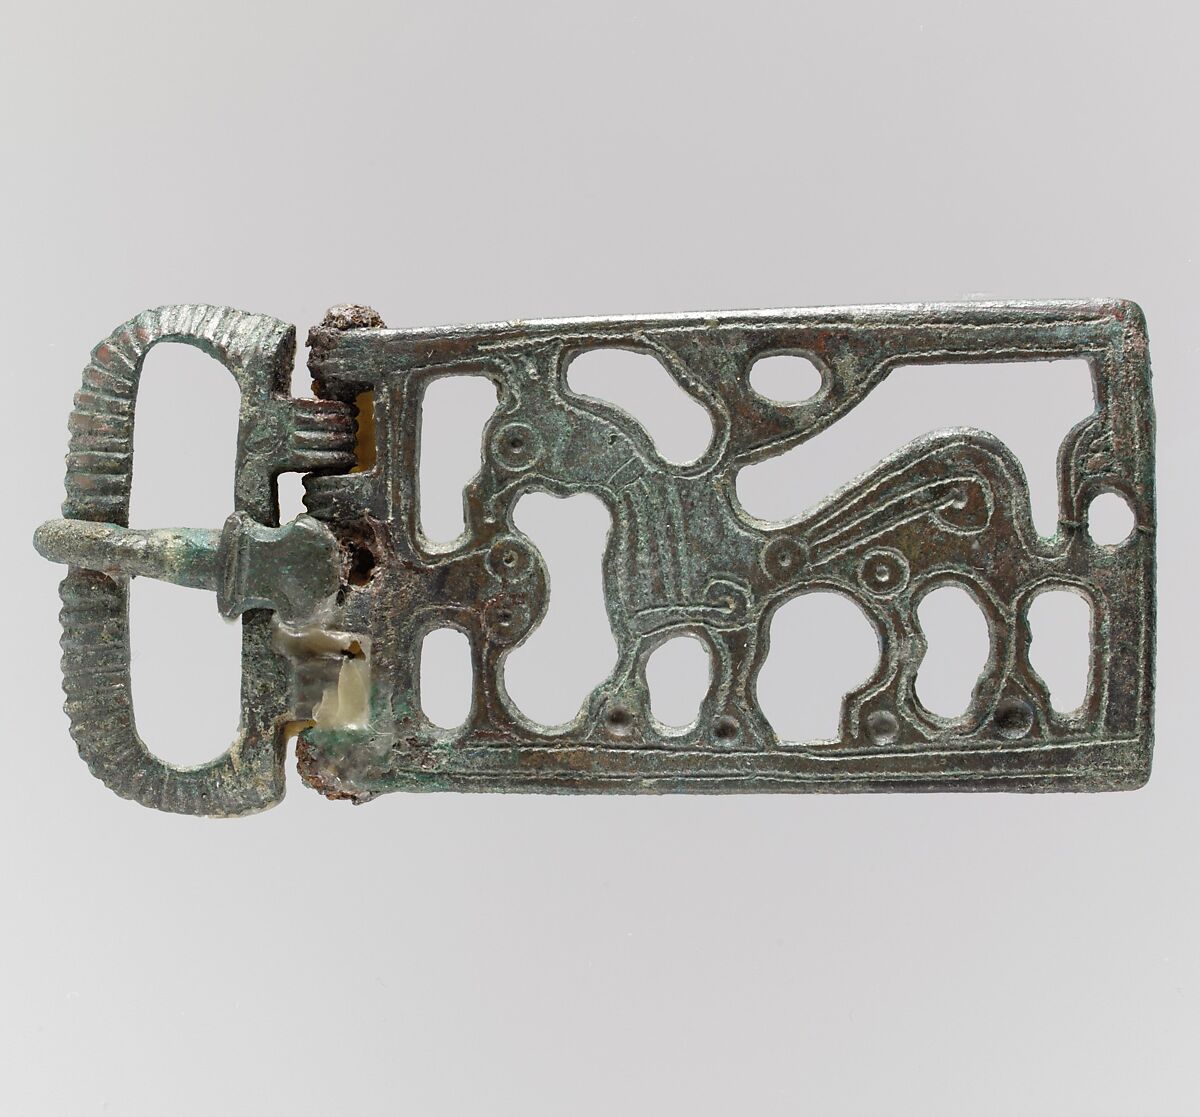 Belt Buckle with a Griffin, Copper alloy, "tinned" surface, Frankish 